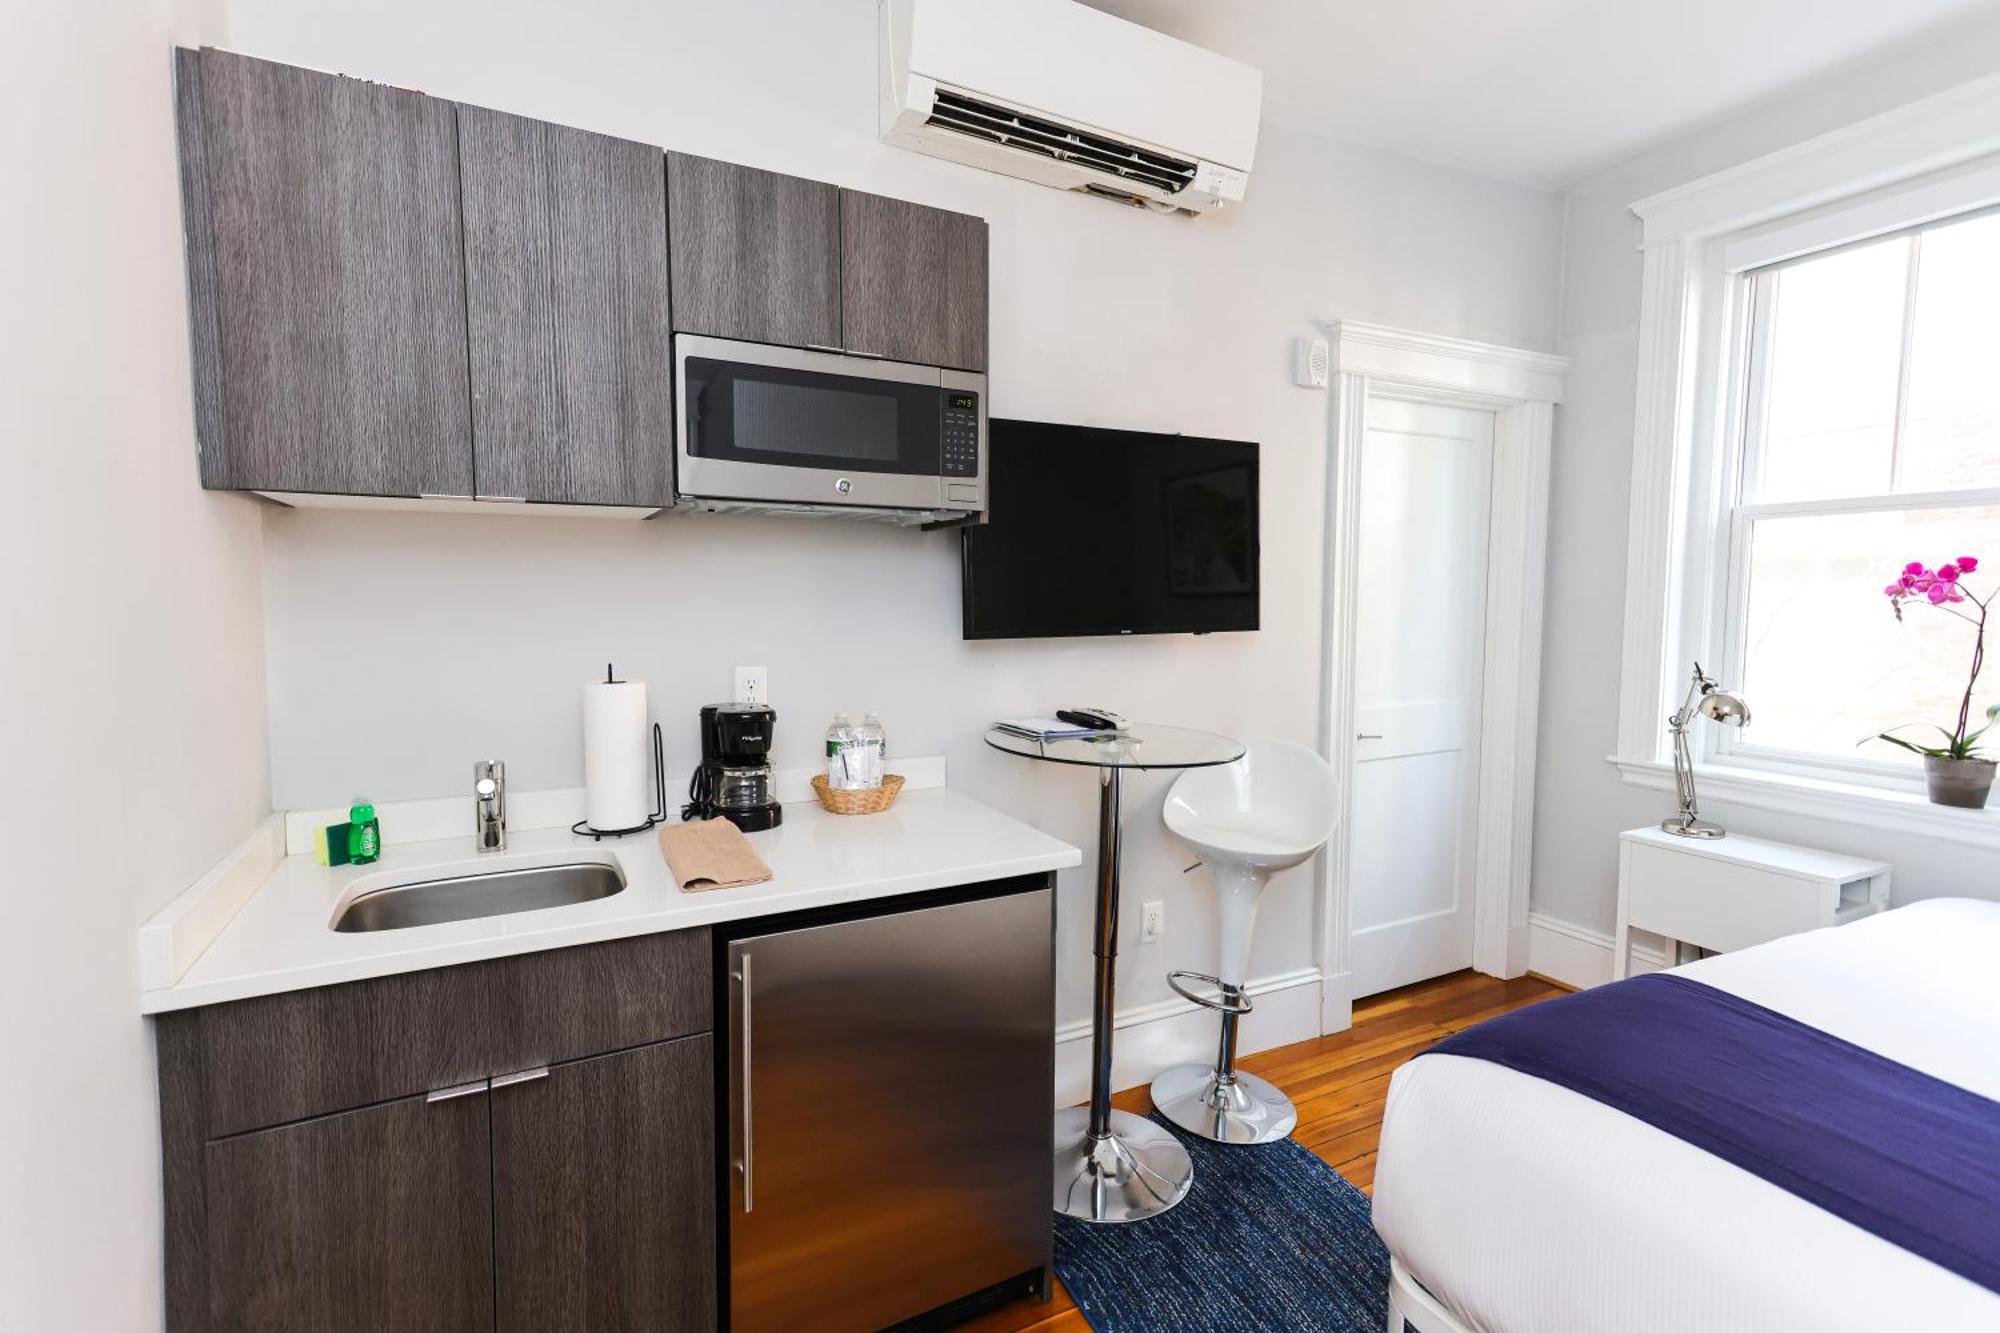 A Stylish Stay W/ A Queen Bed, Heated Floors.. #36 Brookline Exterior photo